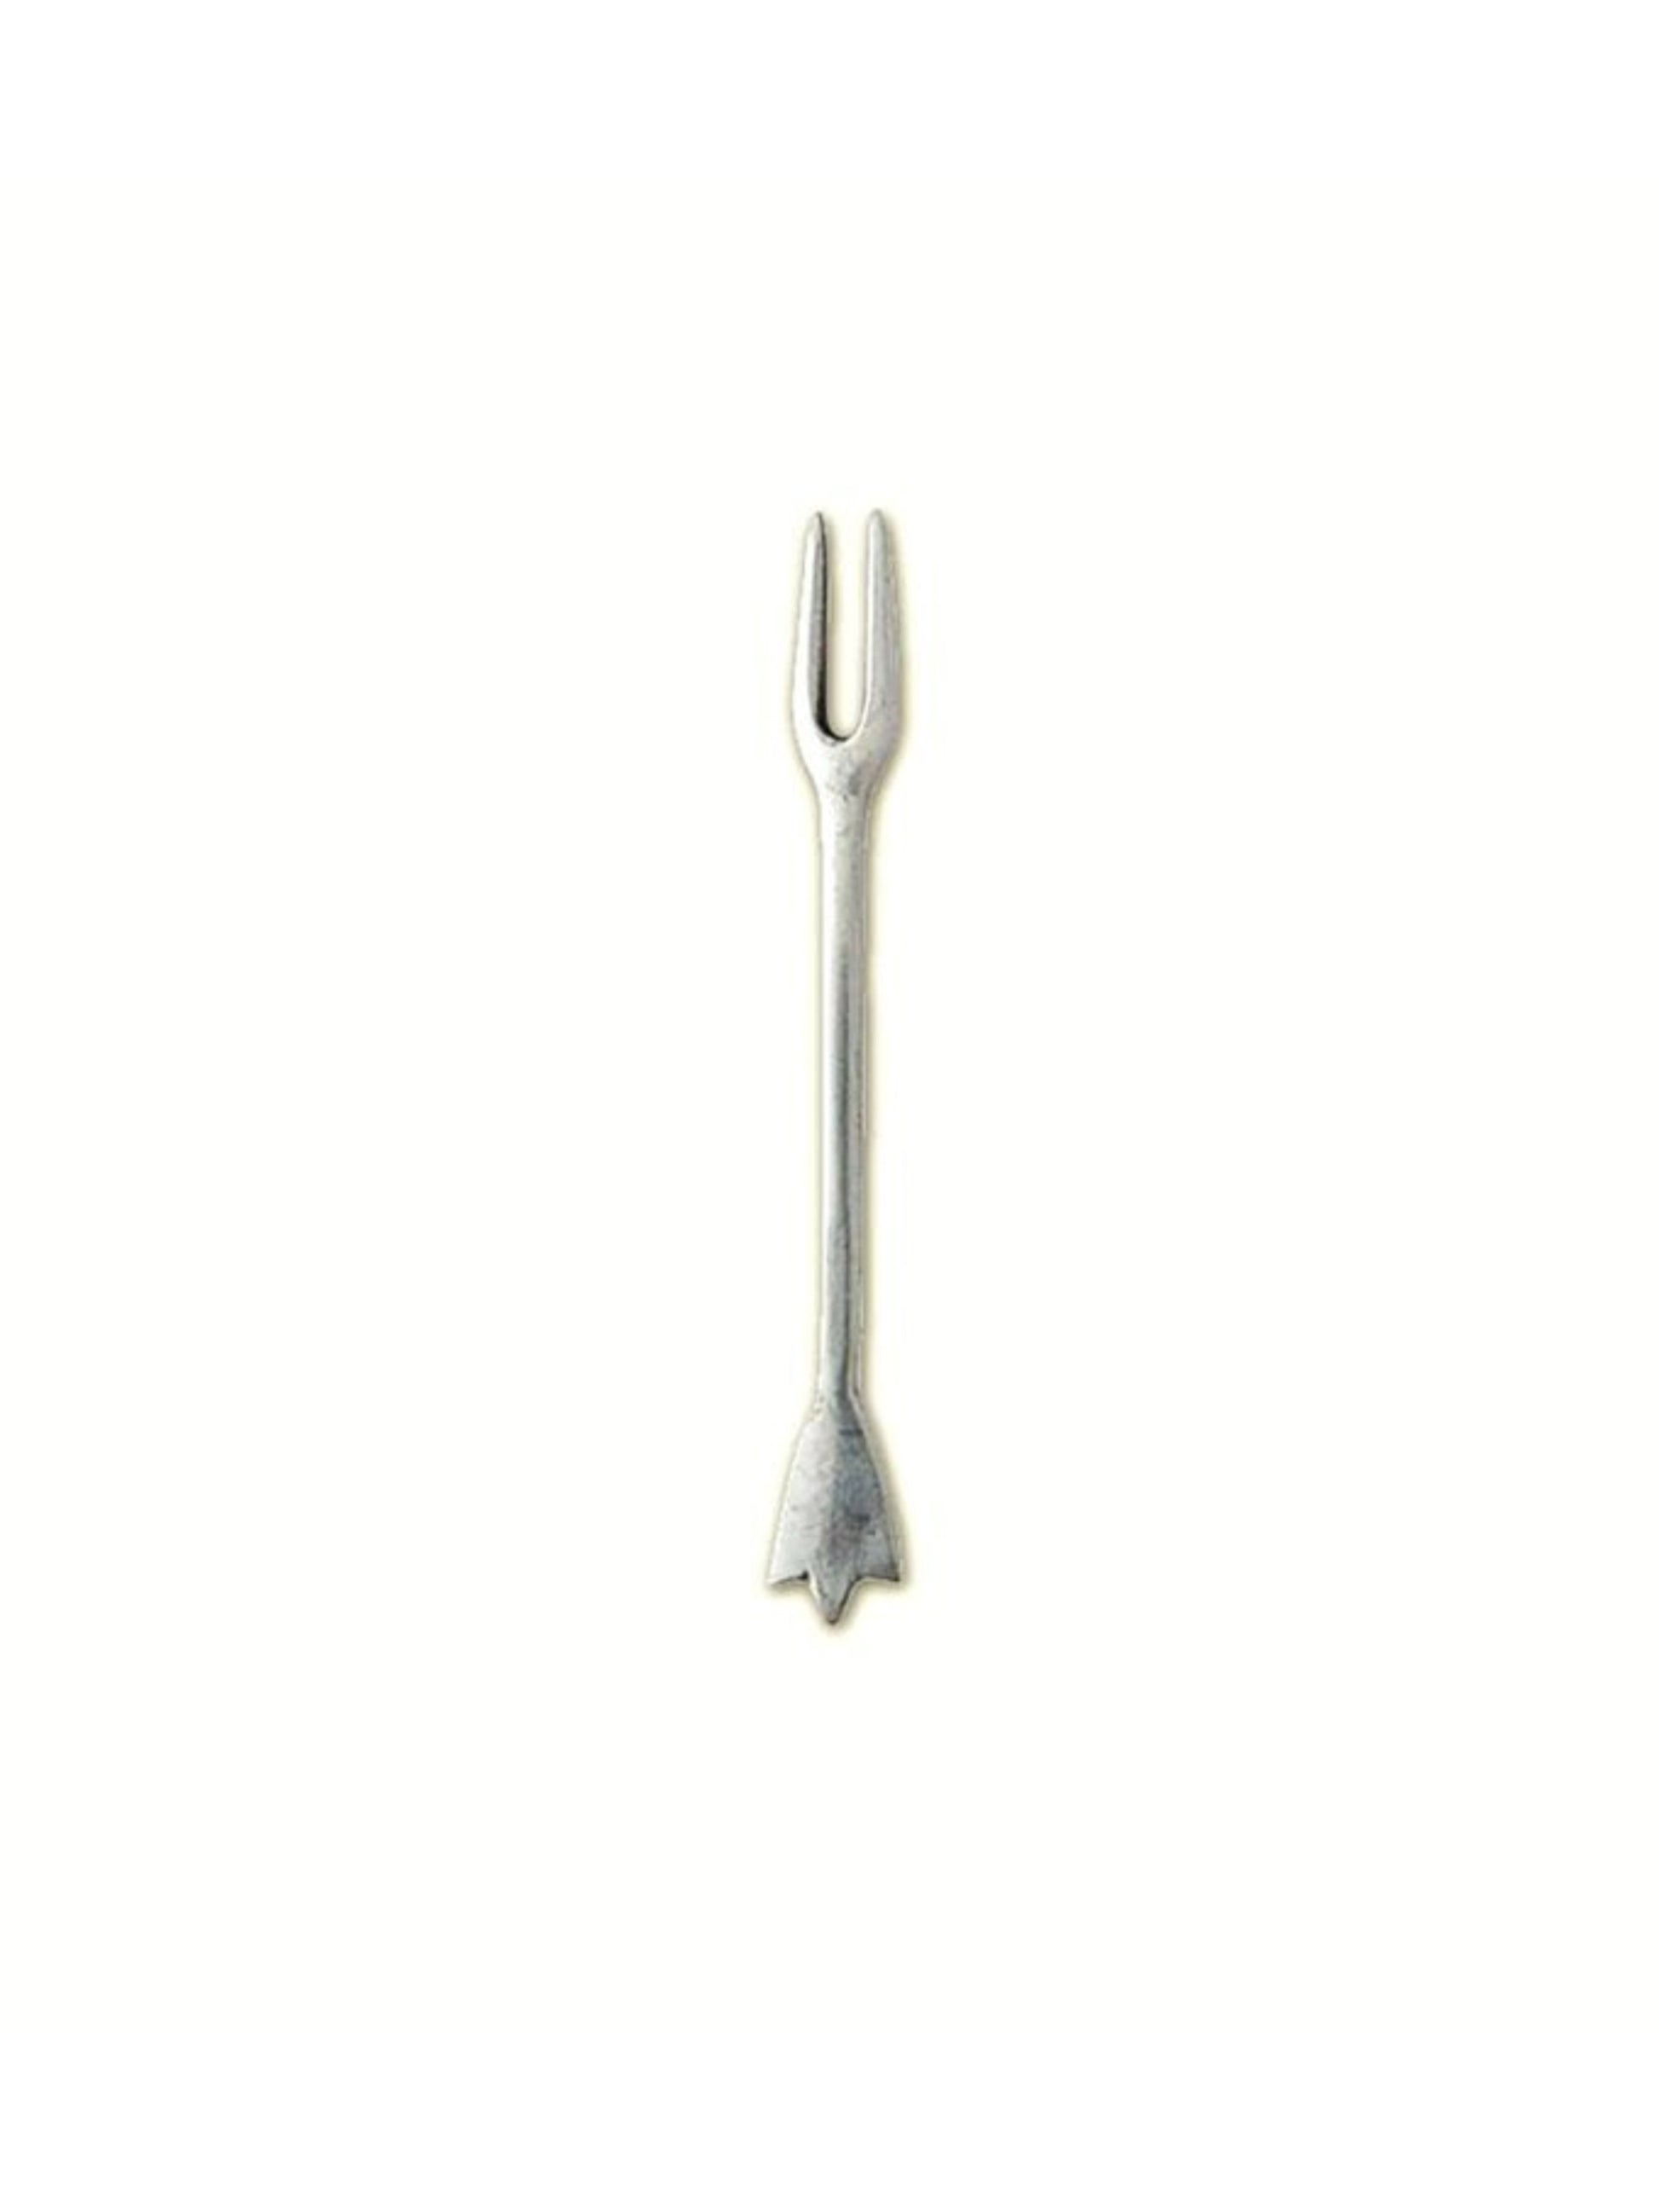 MATCH Pewter Crowne Cocktail Fork Weston Table